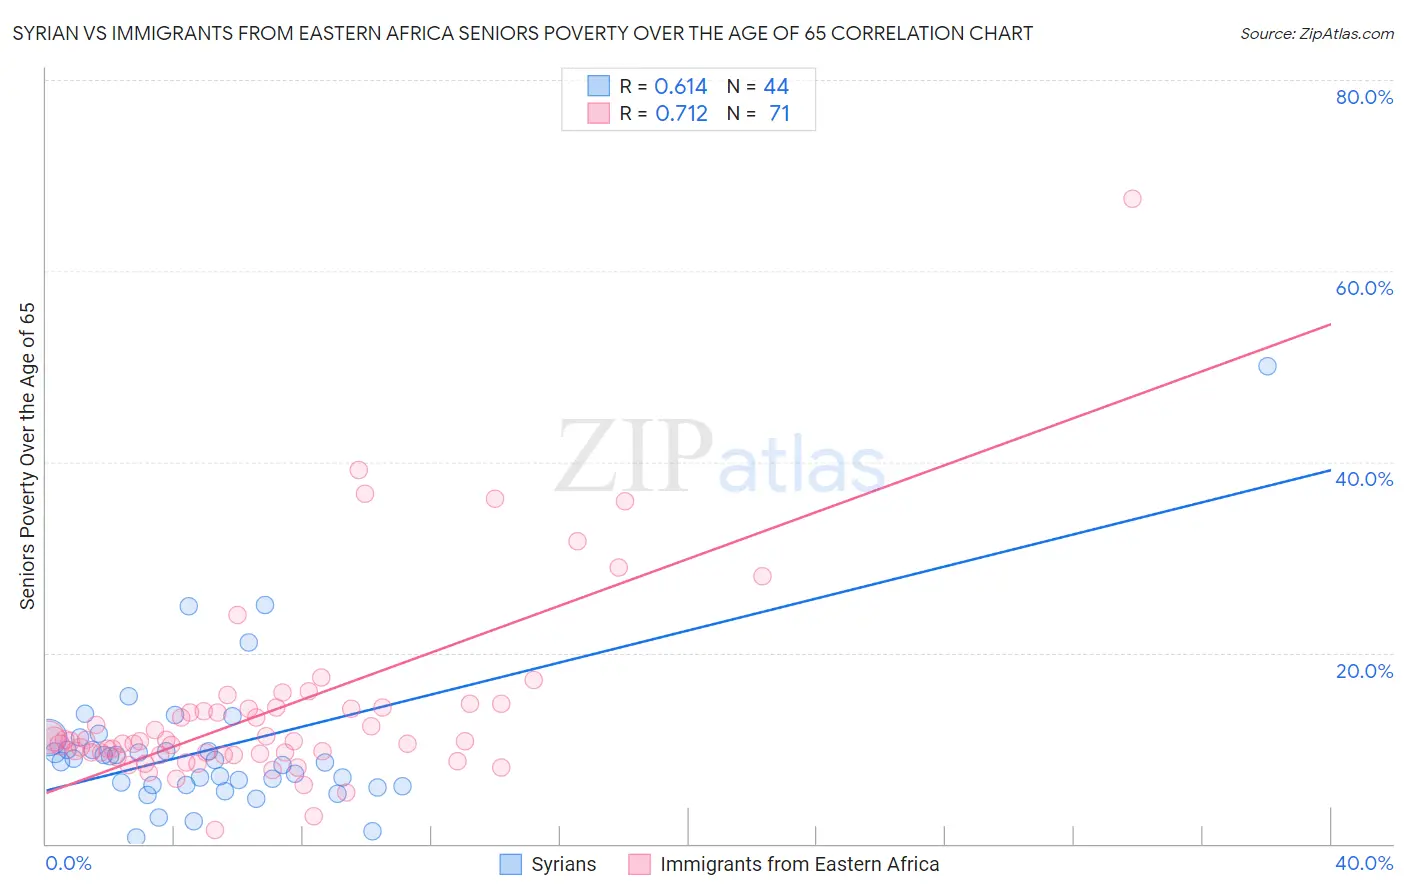 Syrian vs Immigrants from Eastern Africa Seniors Poverty Over the Age of 65